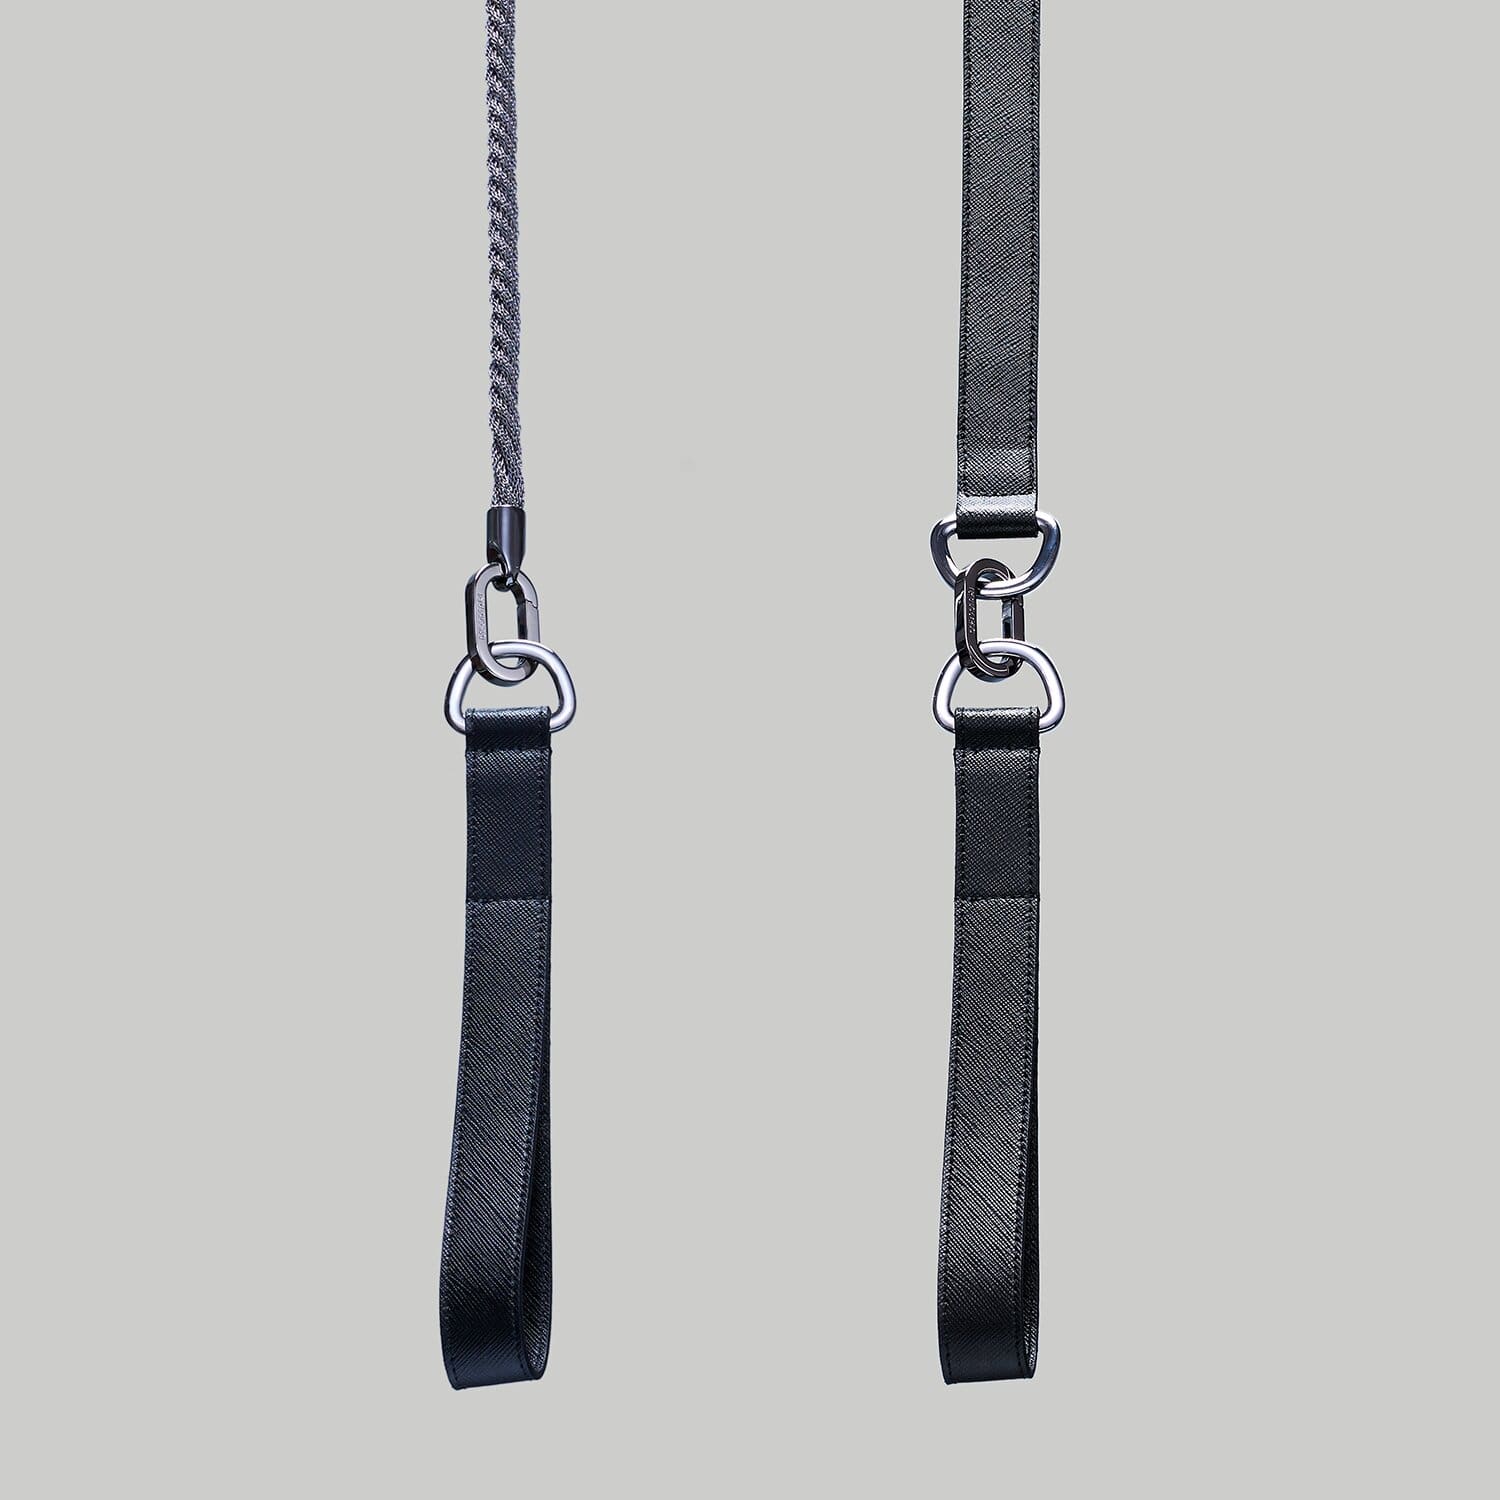 Luxury dog leash handle in black Saffiano leather with Ruthenium